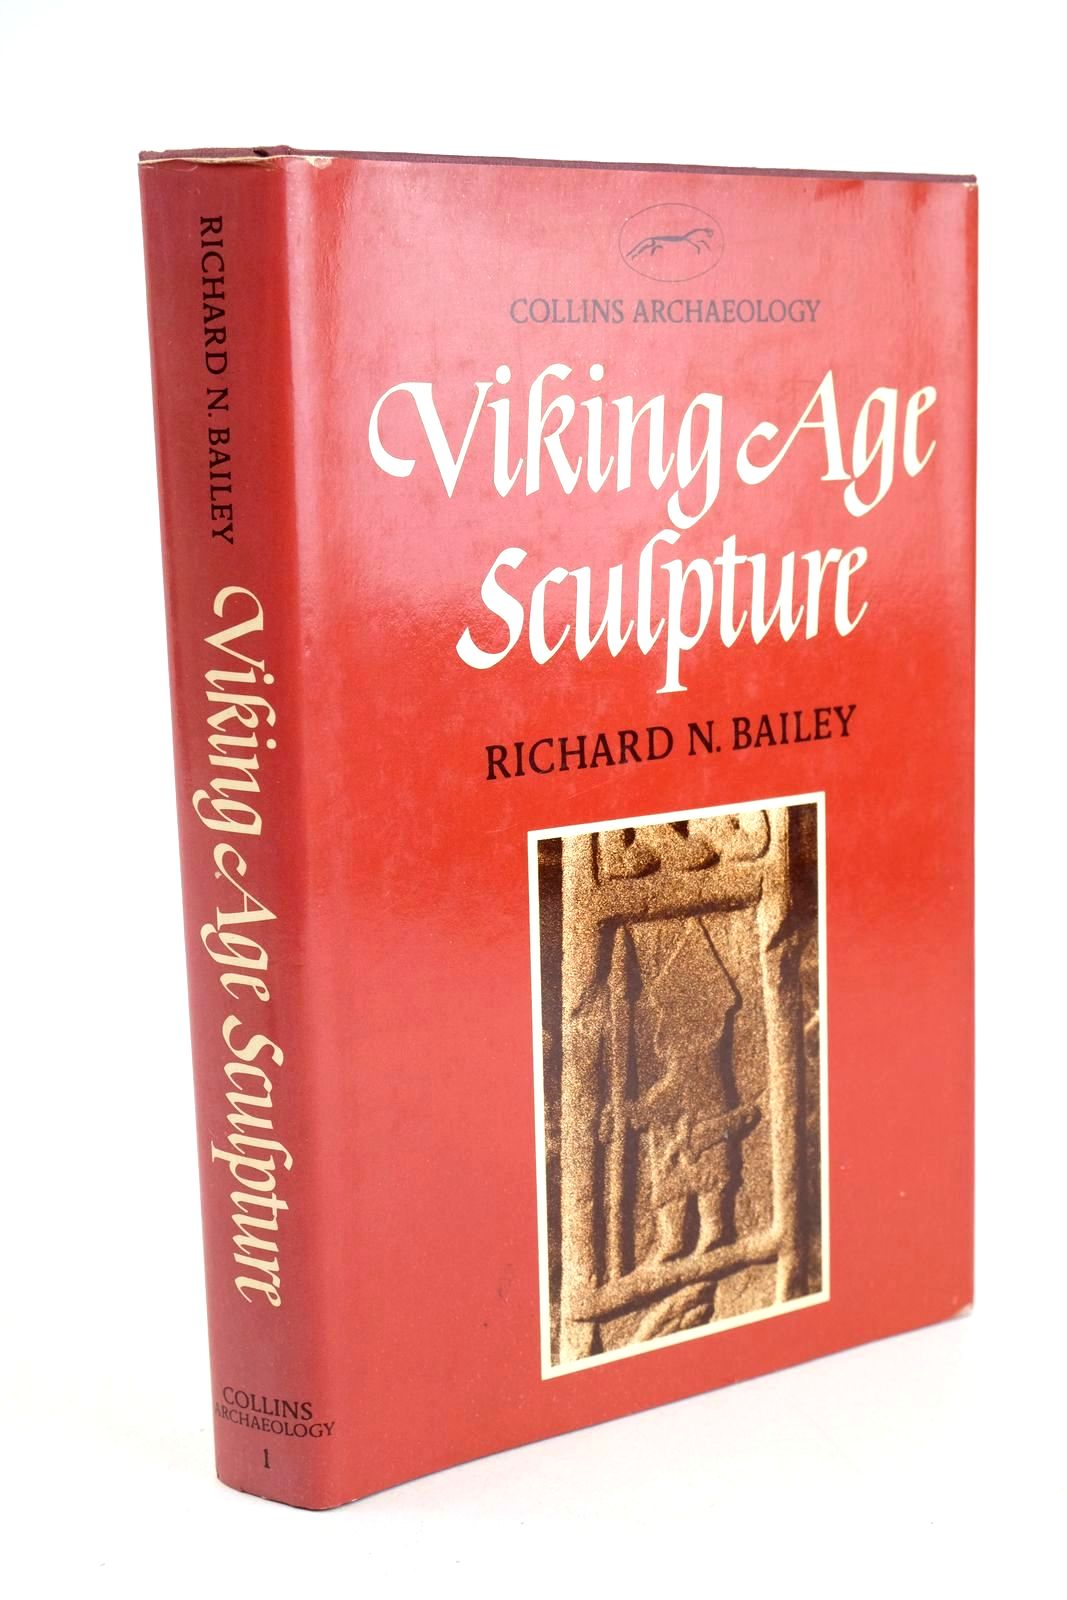 Photo of VIKING AGE SCULPTURE written by Bailey, Richard N. published by Collins (STOCK CODE: 1327789)  for sale by Stella & Rose's Books